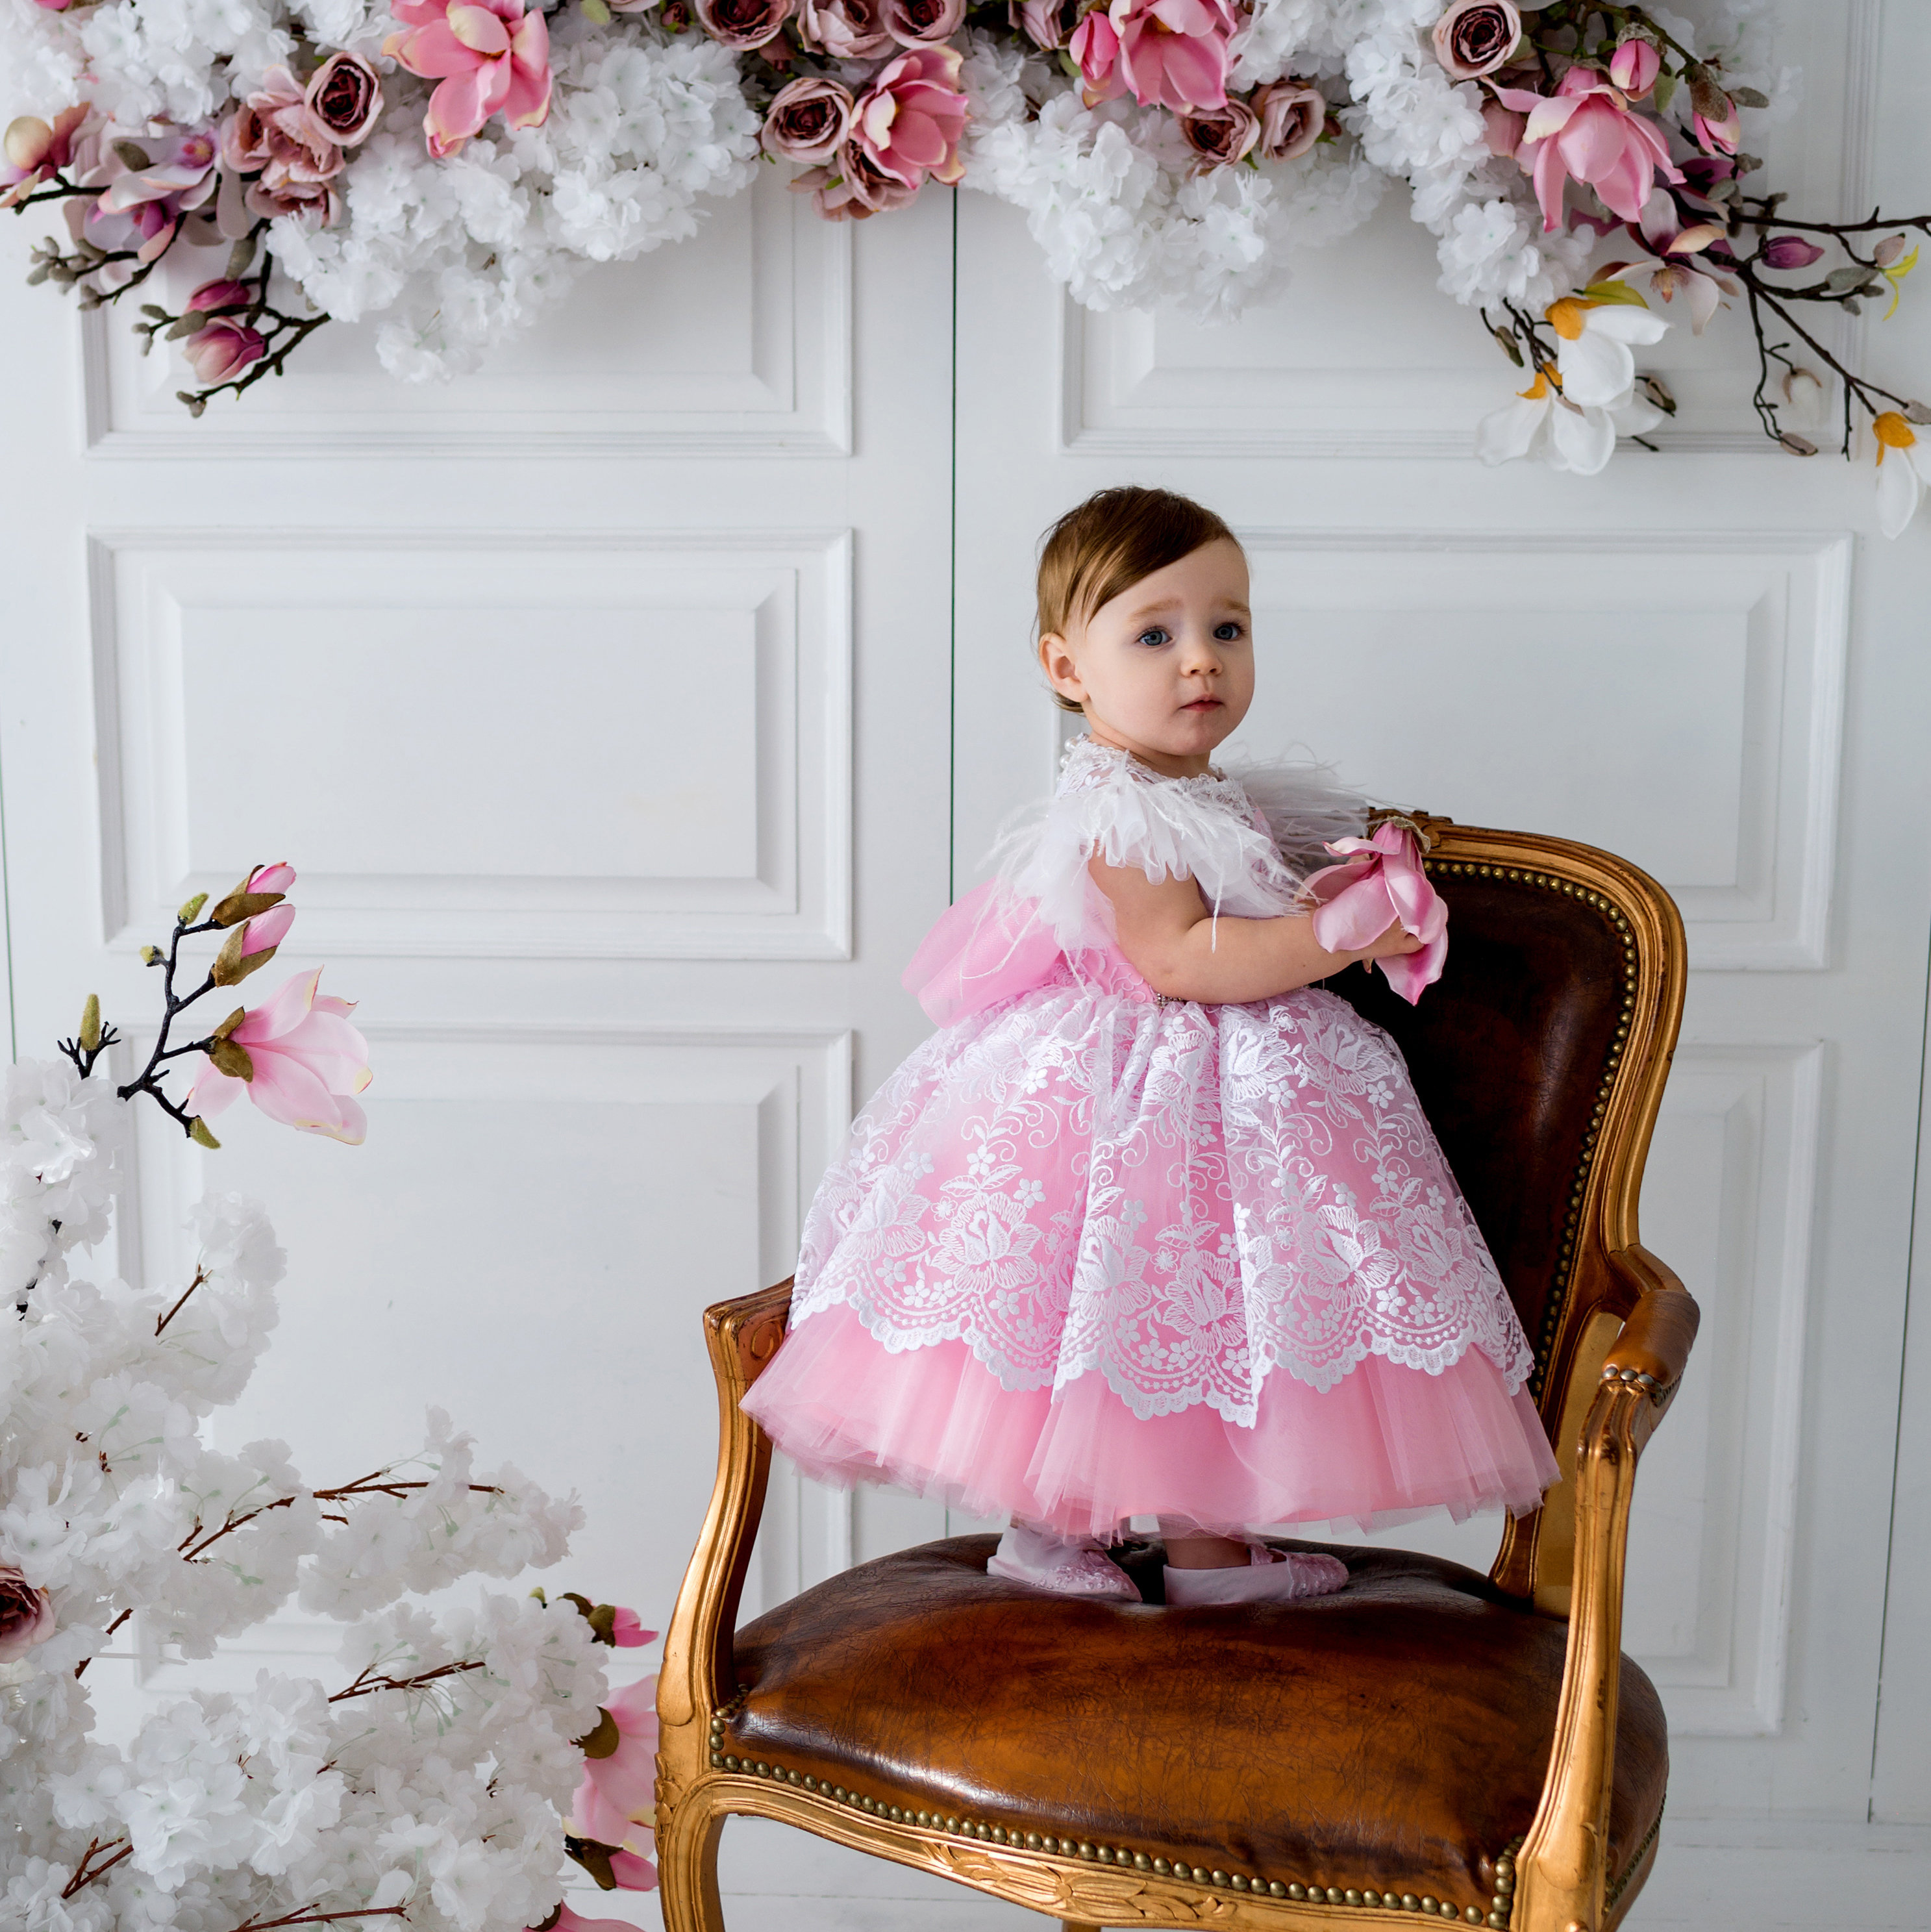 First Birthday butterfly baby dress / Gown | eBay